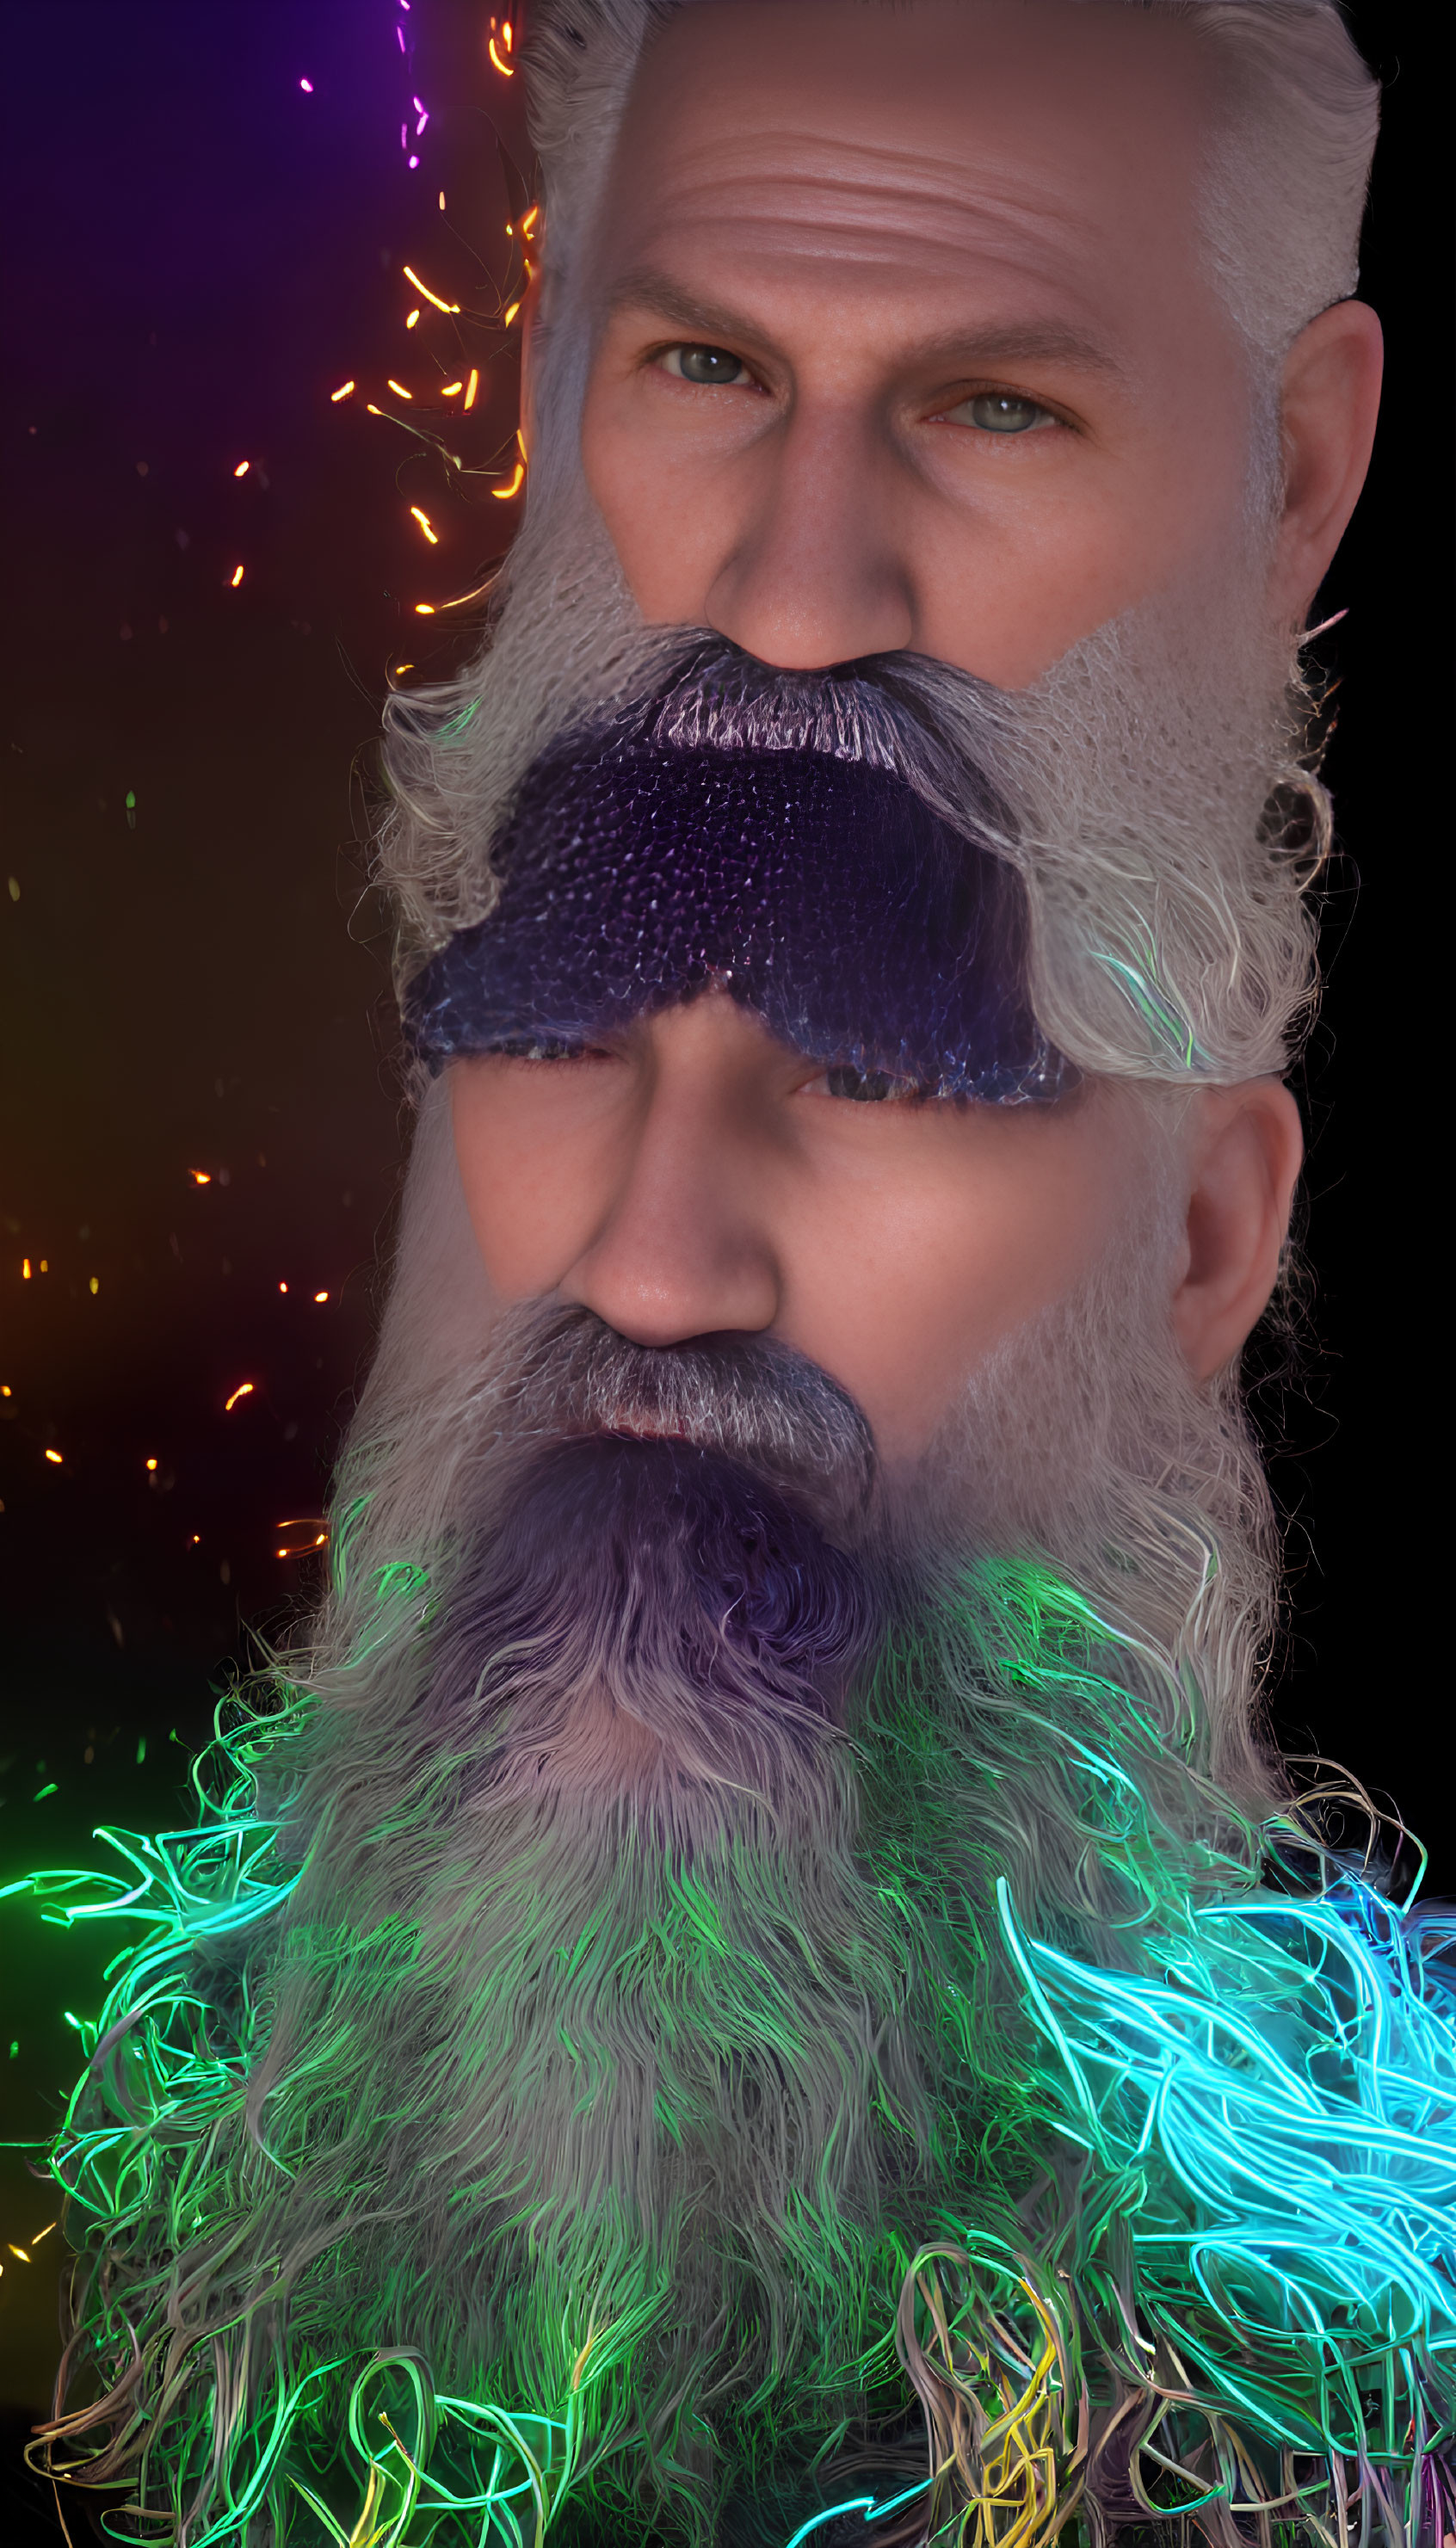 Elderly man with long white beard and colorful lights in deep-set eyes on dark background